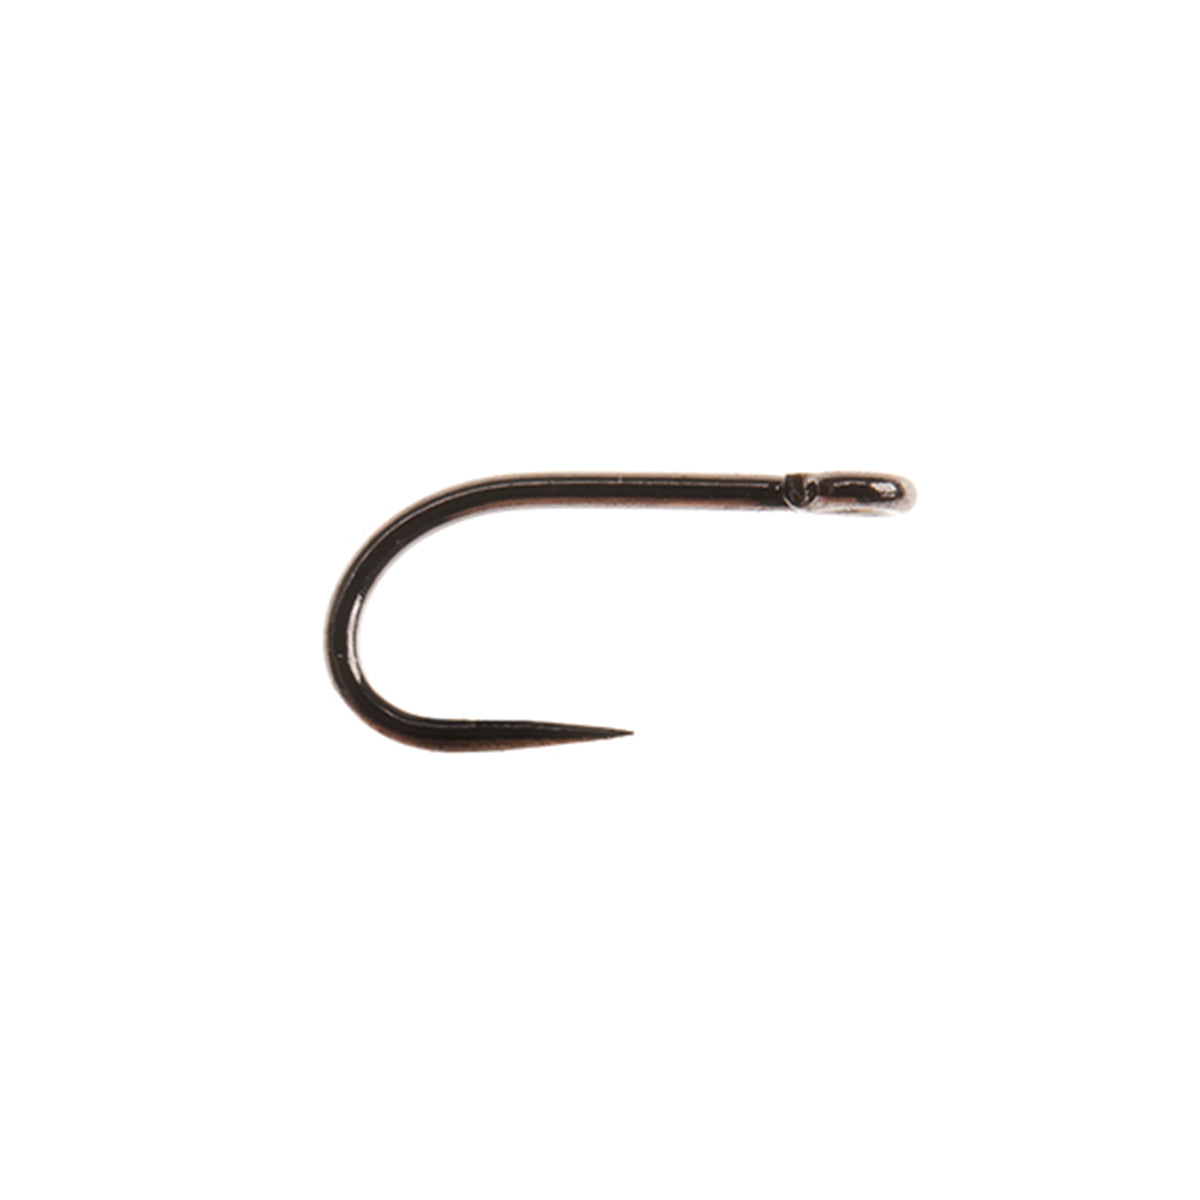 Ahrex FW 507 Dry Fly Mini Hook Barbless #22